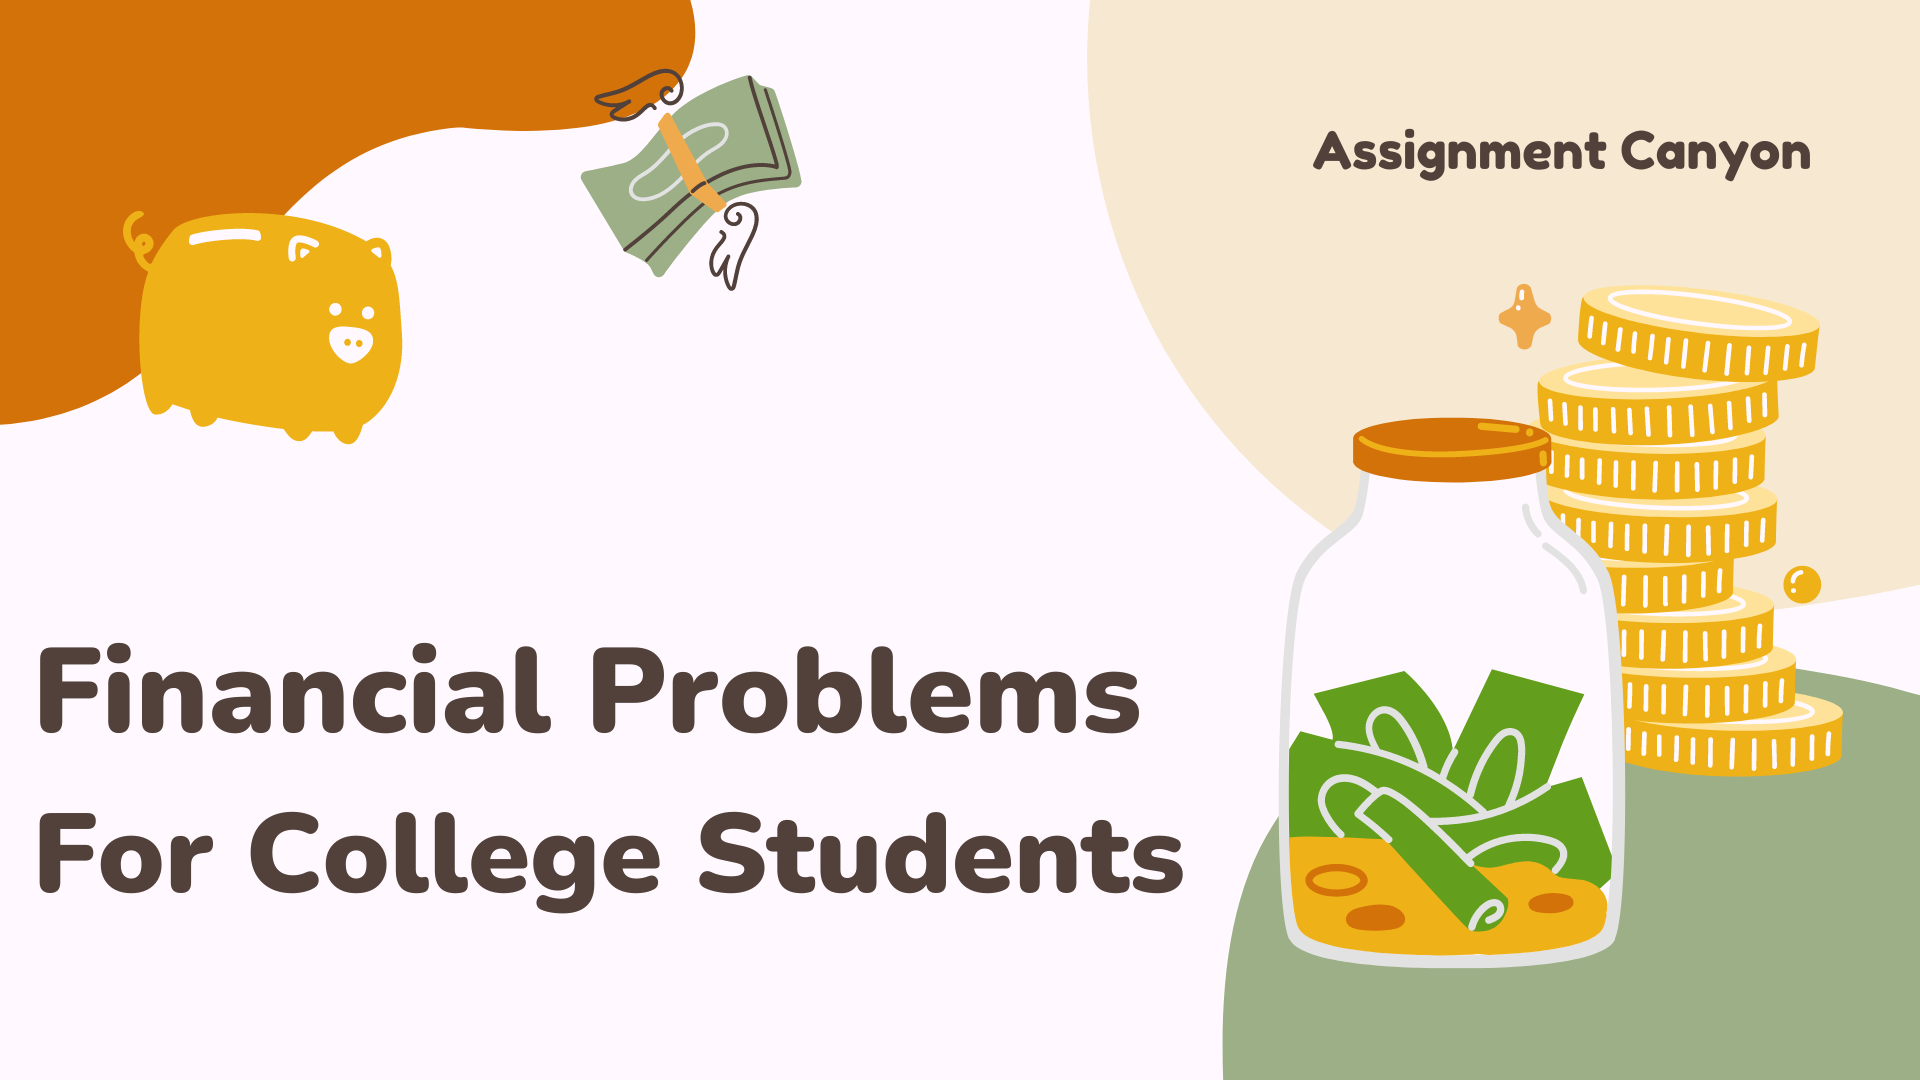 Financial Problems for college students - a written piece from Assignment Canyon